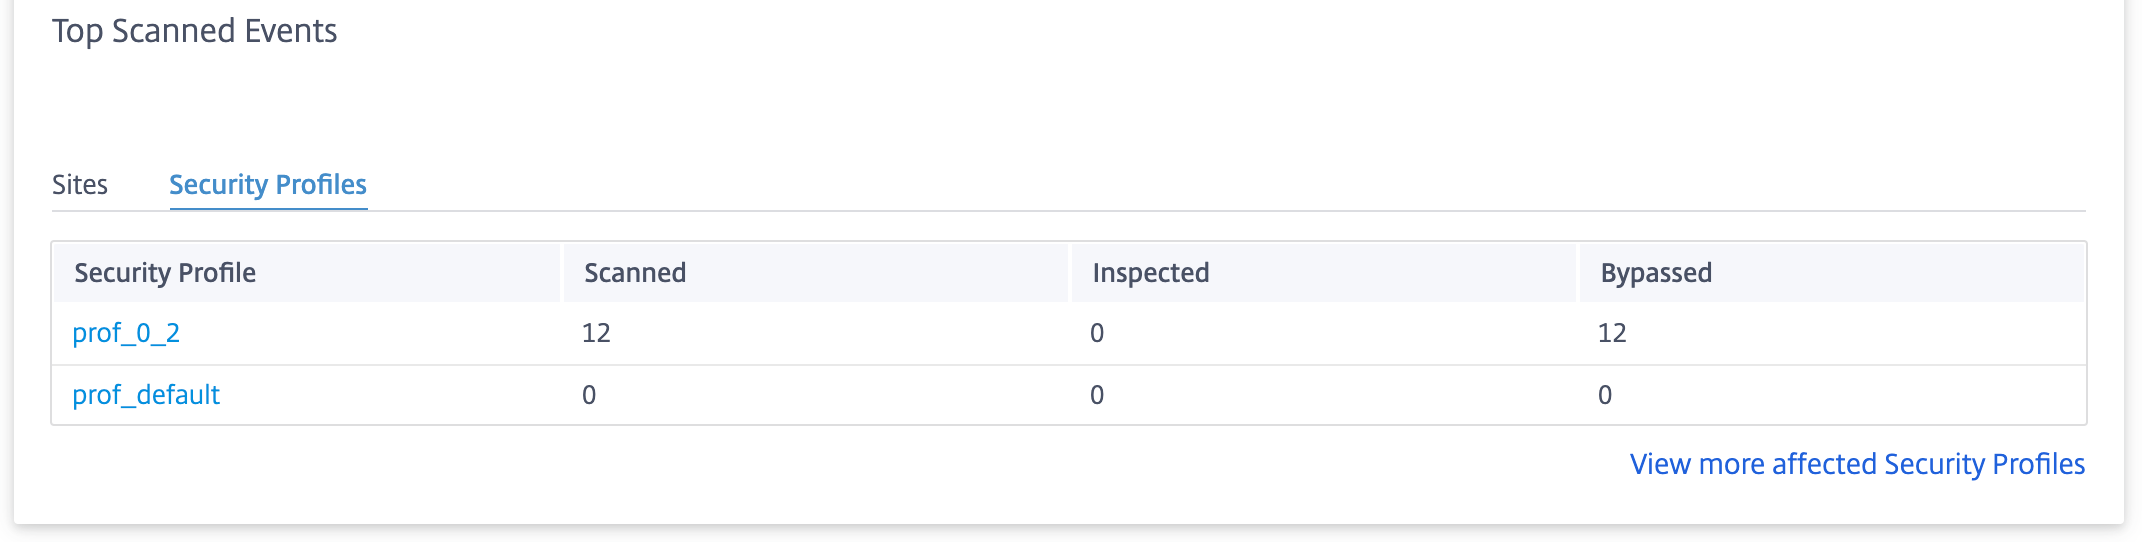 SSL inspection security profile events